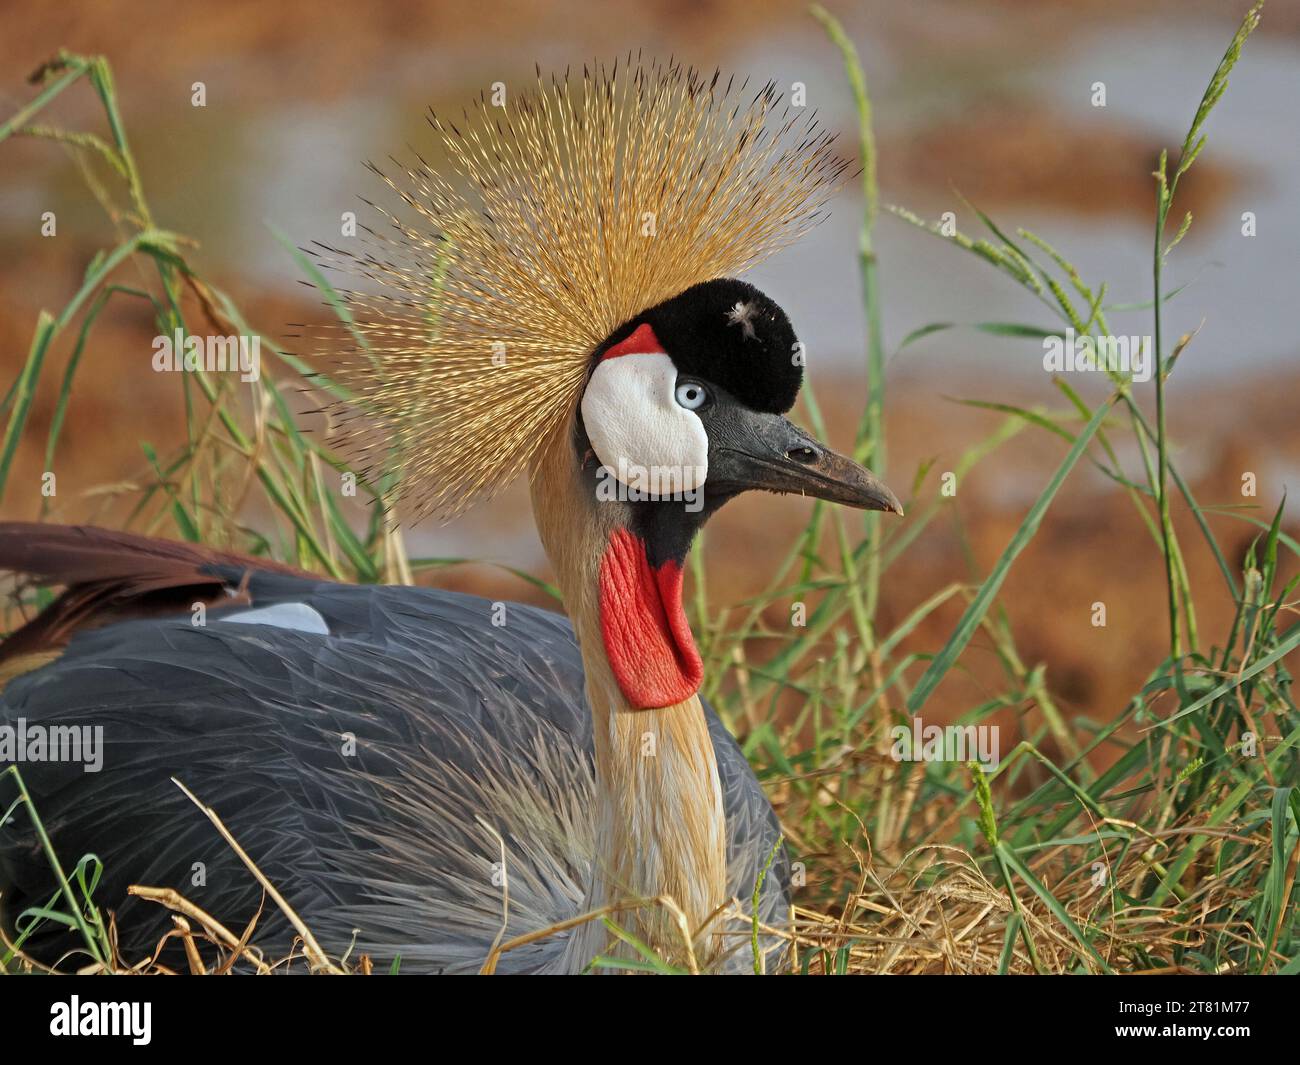 detail Grey Crowned Crane (Balearica regulorum) sitting on nest with  glittering gold thread feathers of crown, glassy eye & red wattles,Kenya,Africa Stock Photo